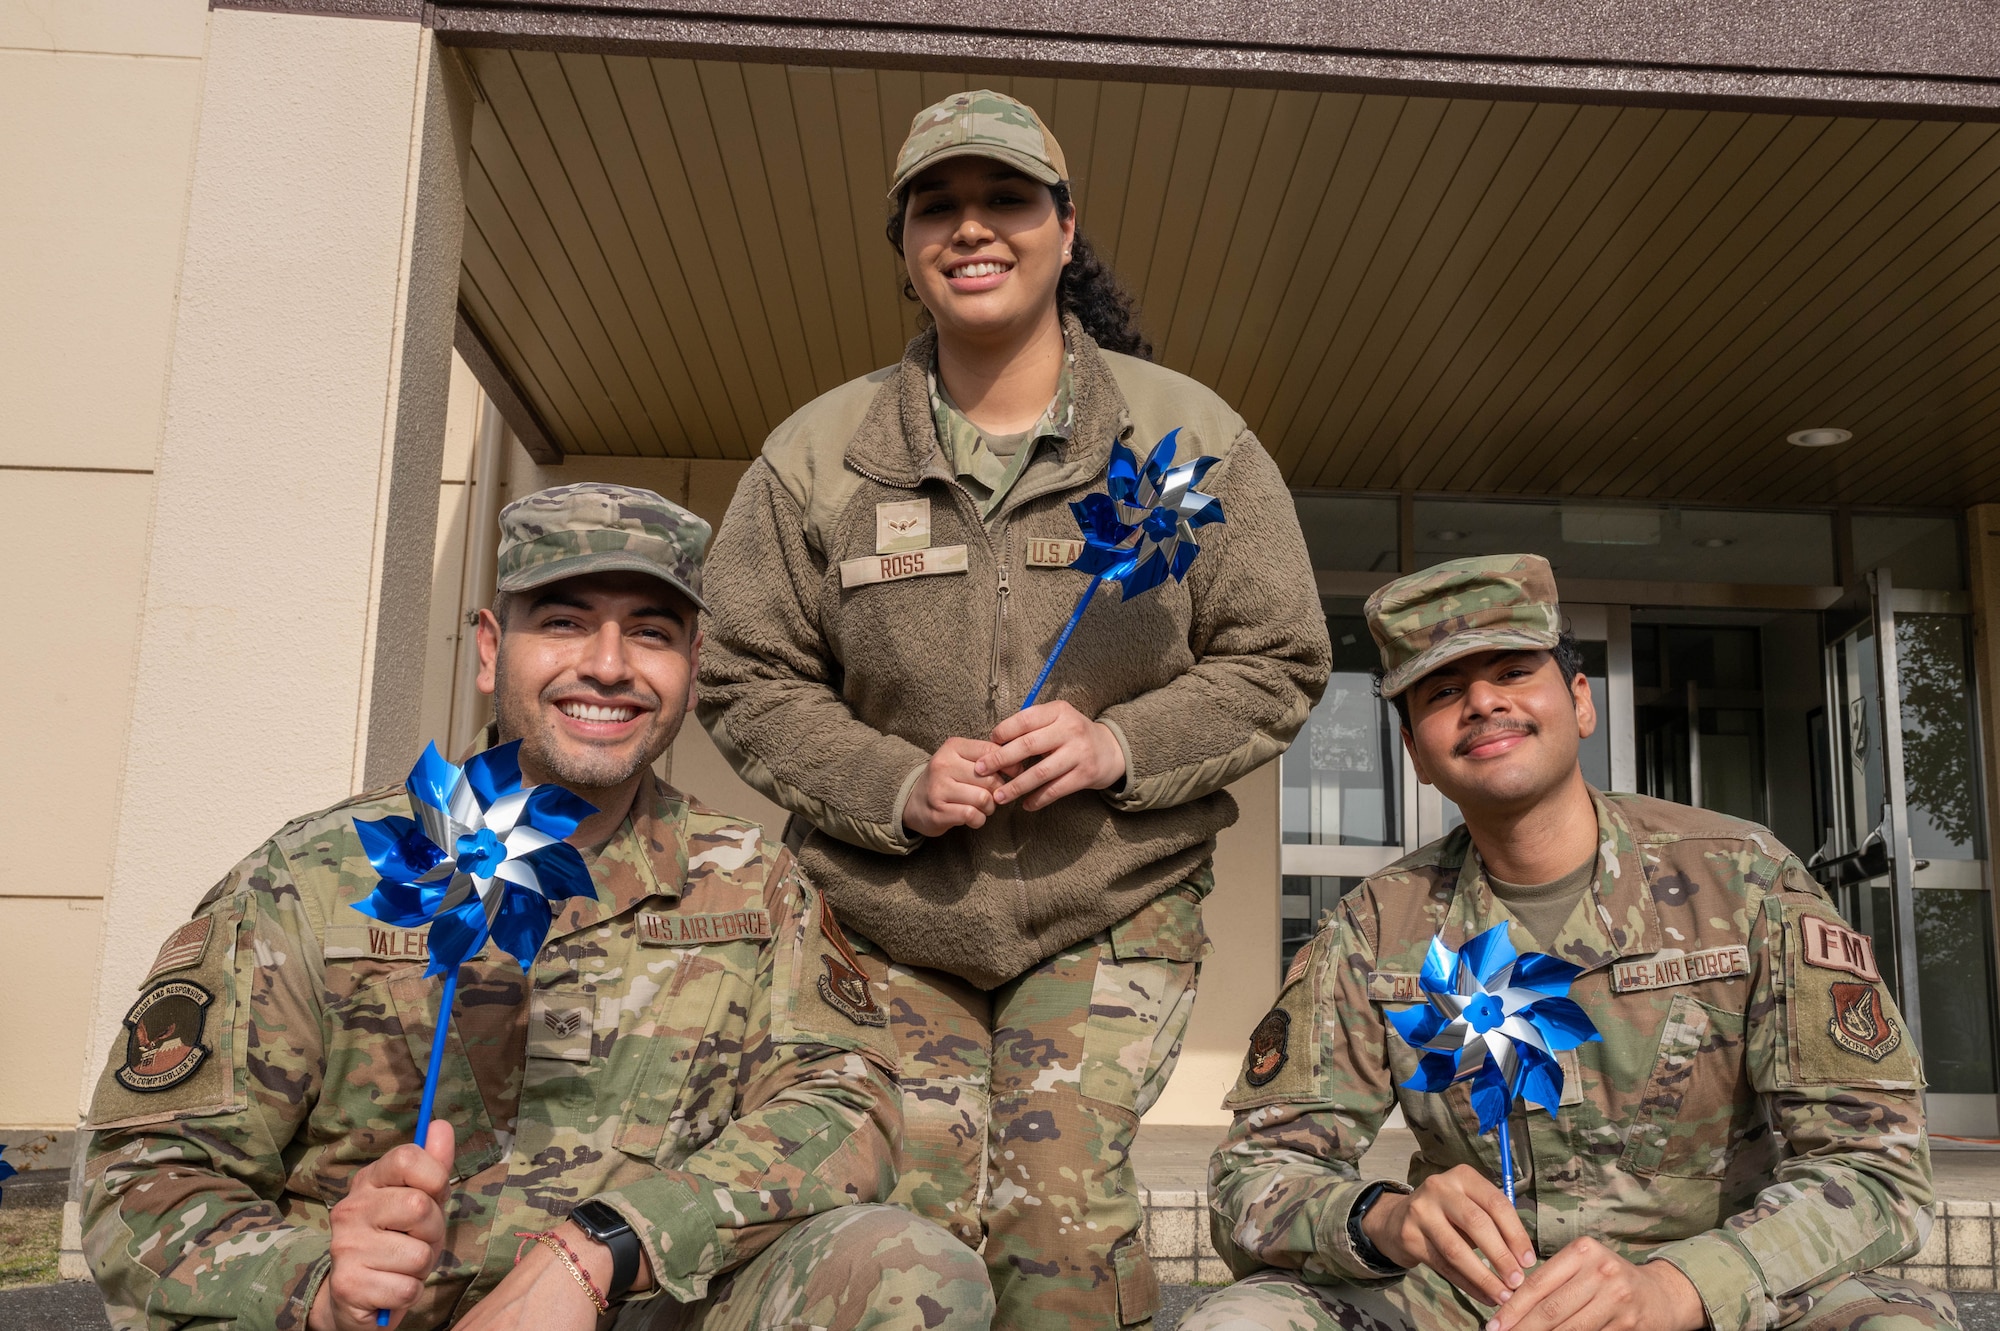 Three Airmen pose for a phot and hold pinwheels.